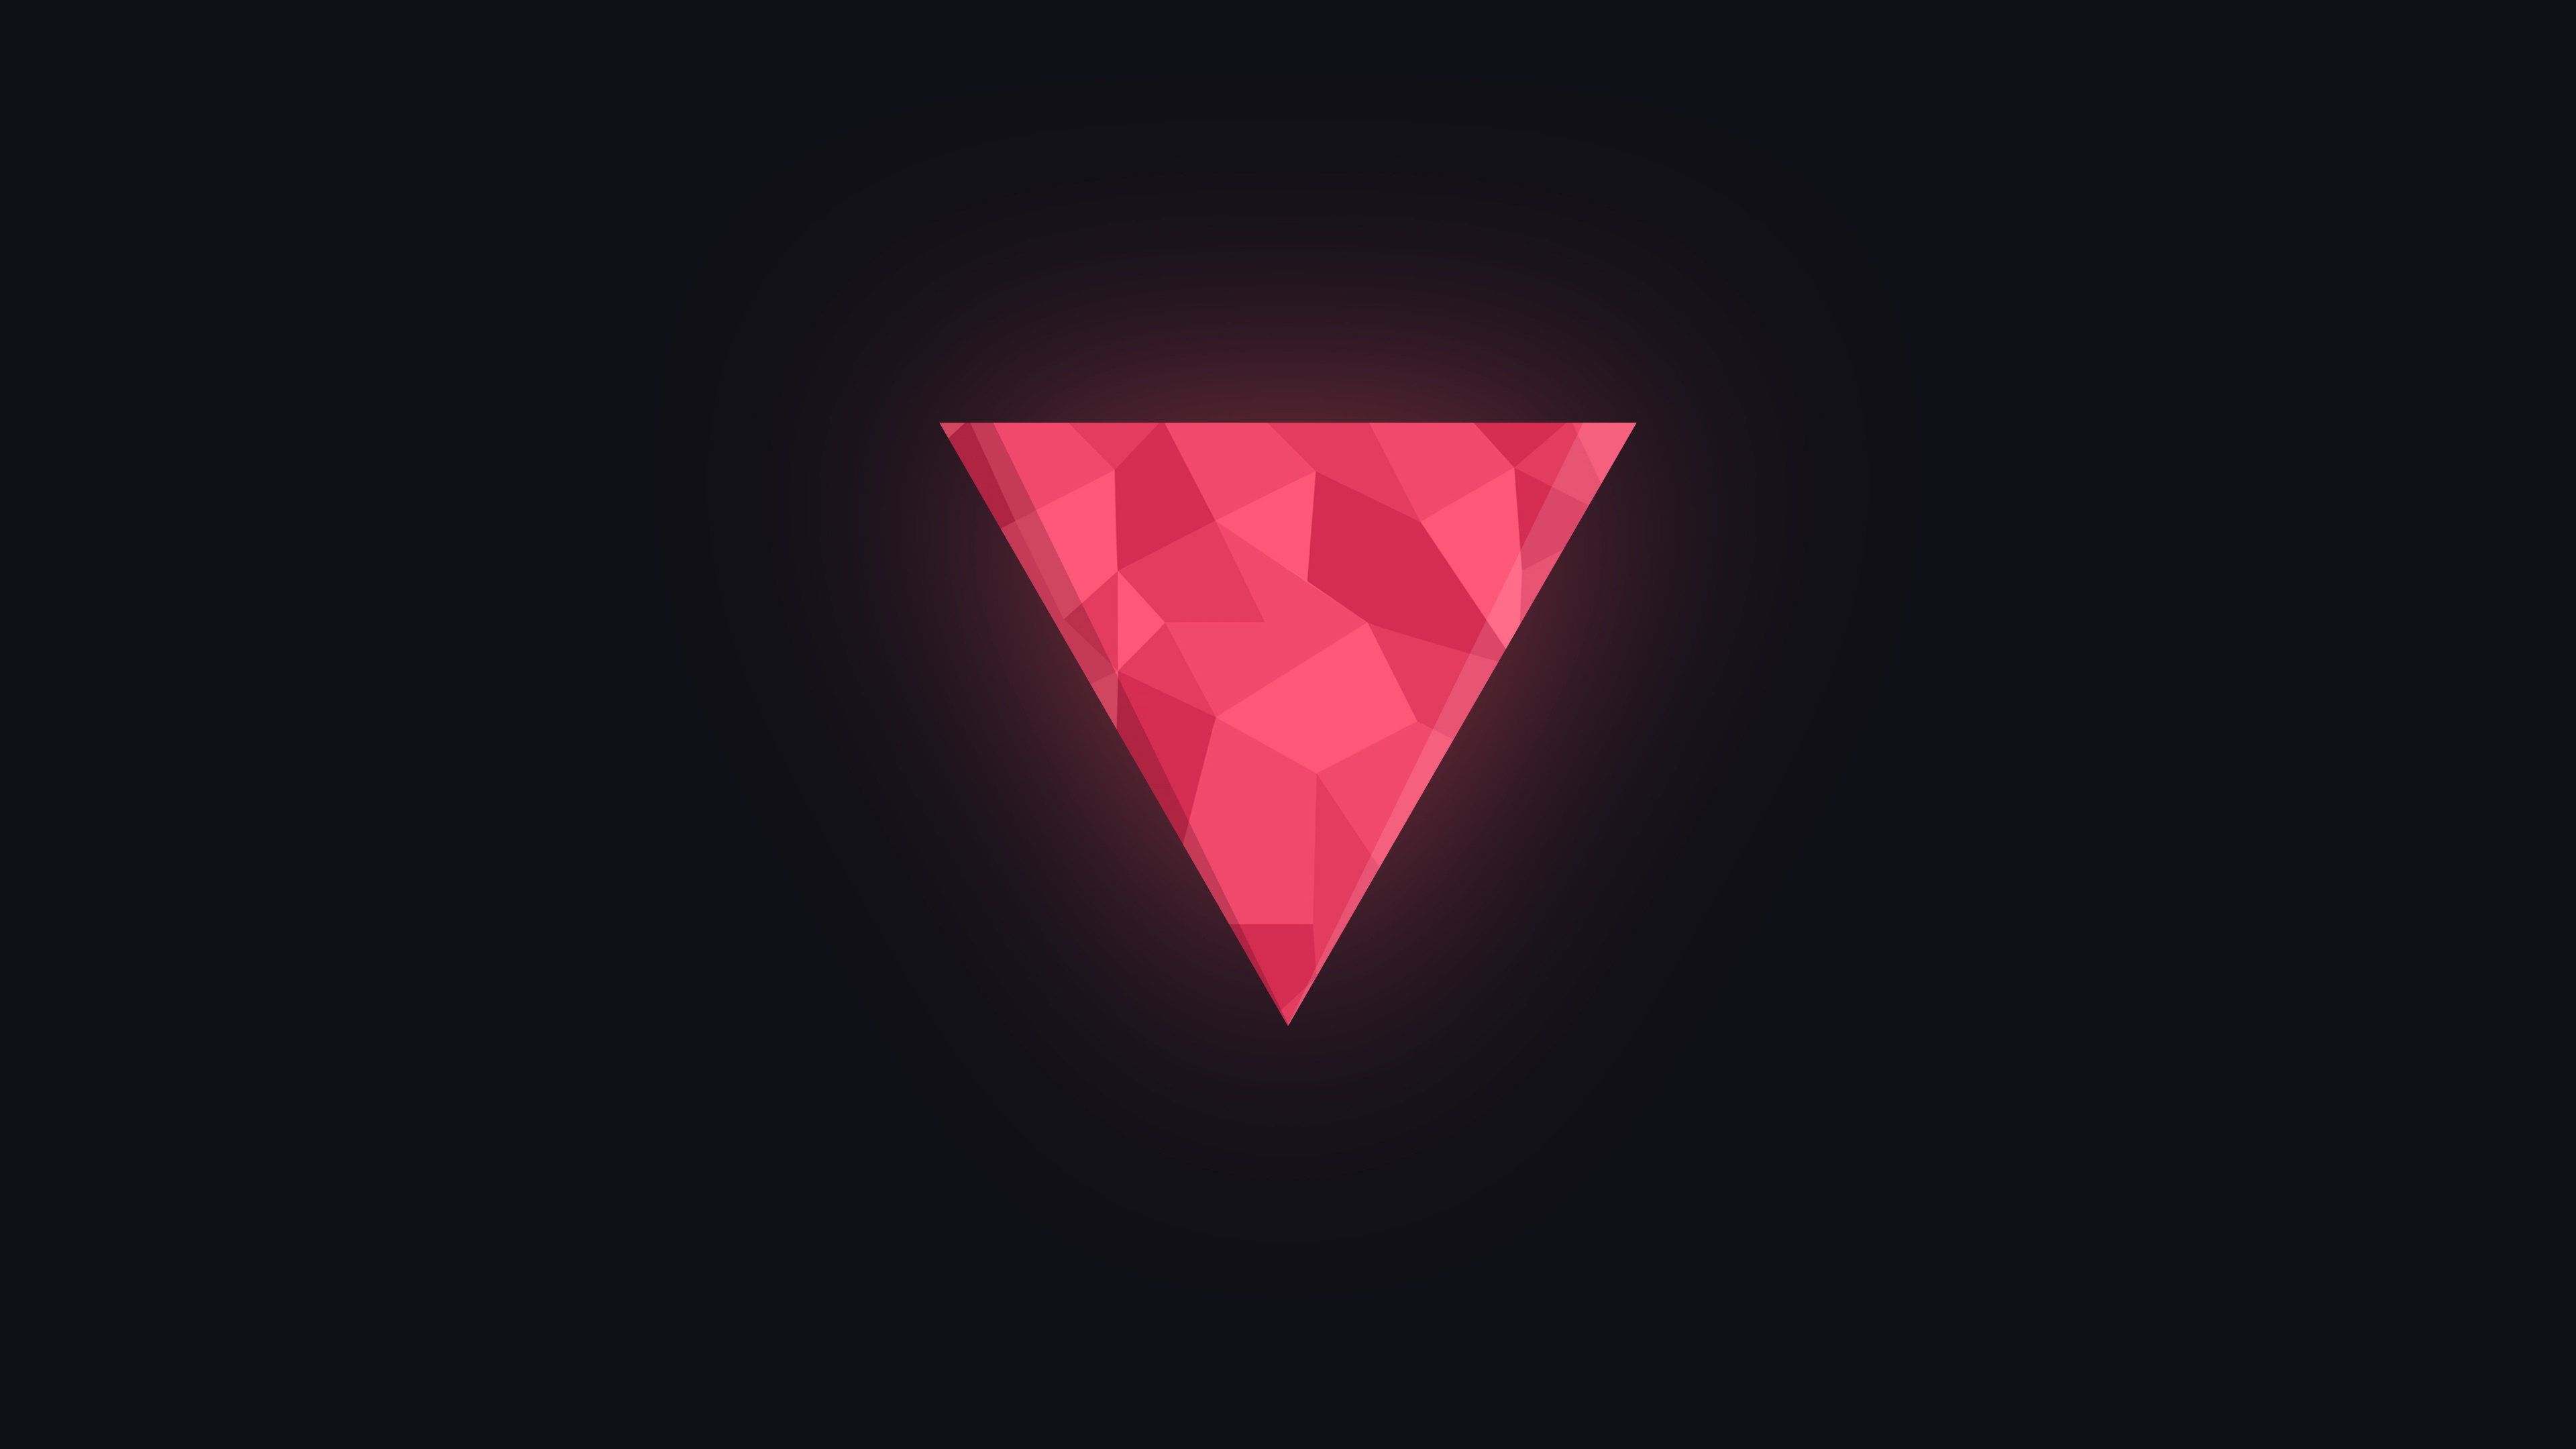 A pink triangle on a black background - Clean